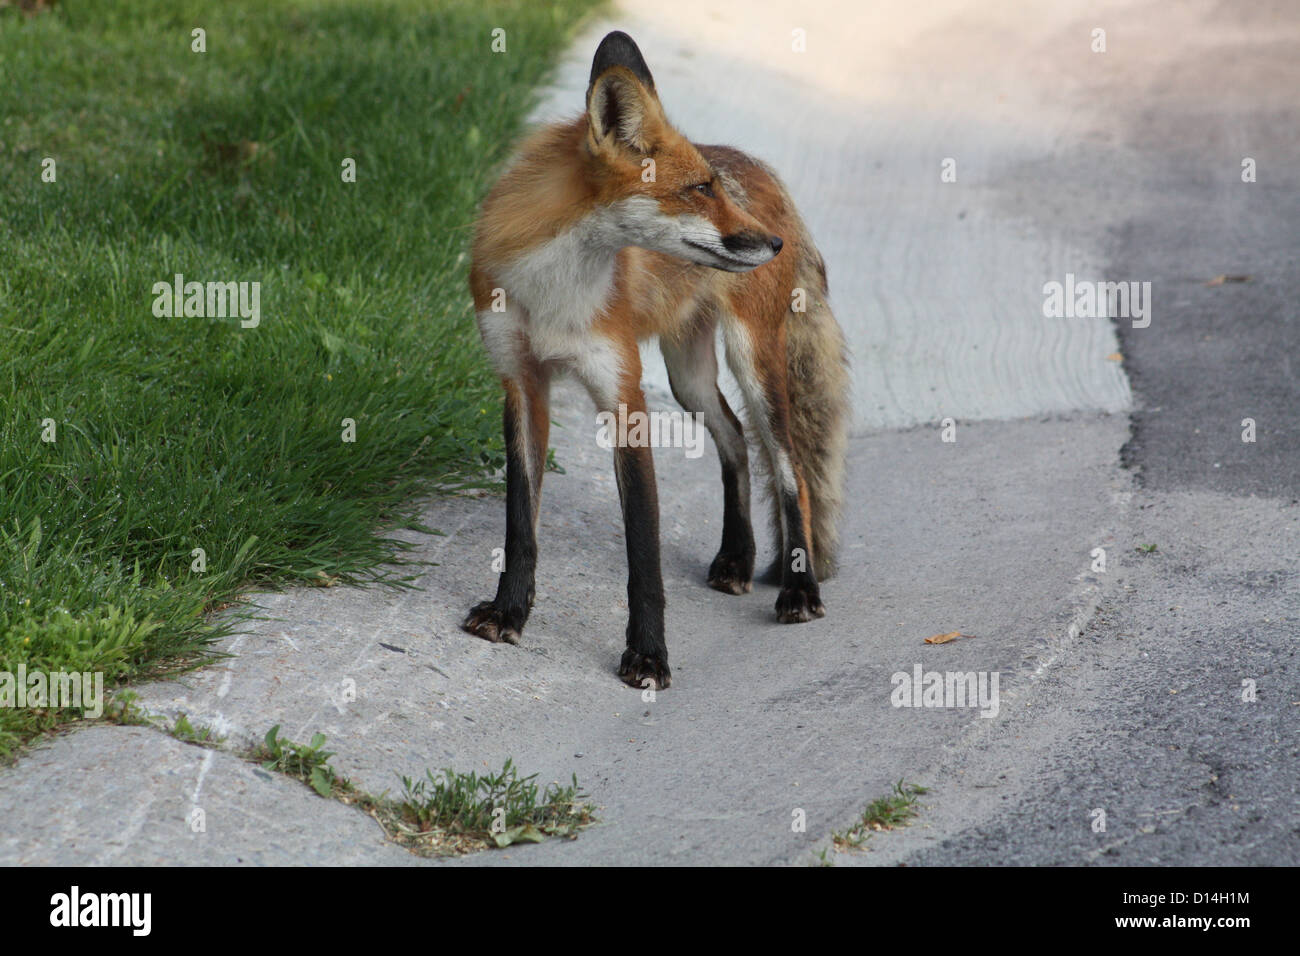 Wild Red Fox walking at the edge of a road, in a residential neighborhood. Stock Photo